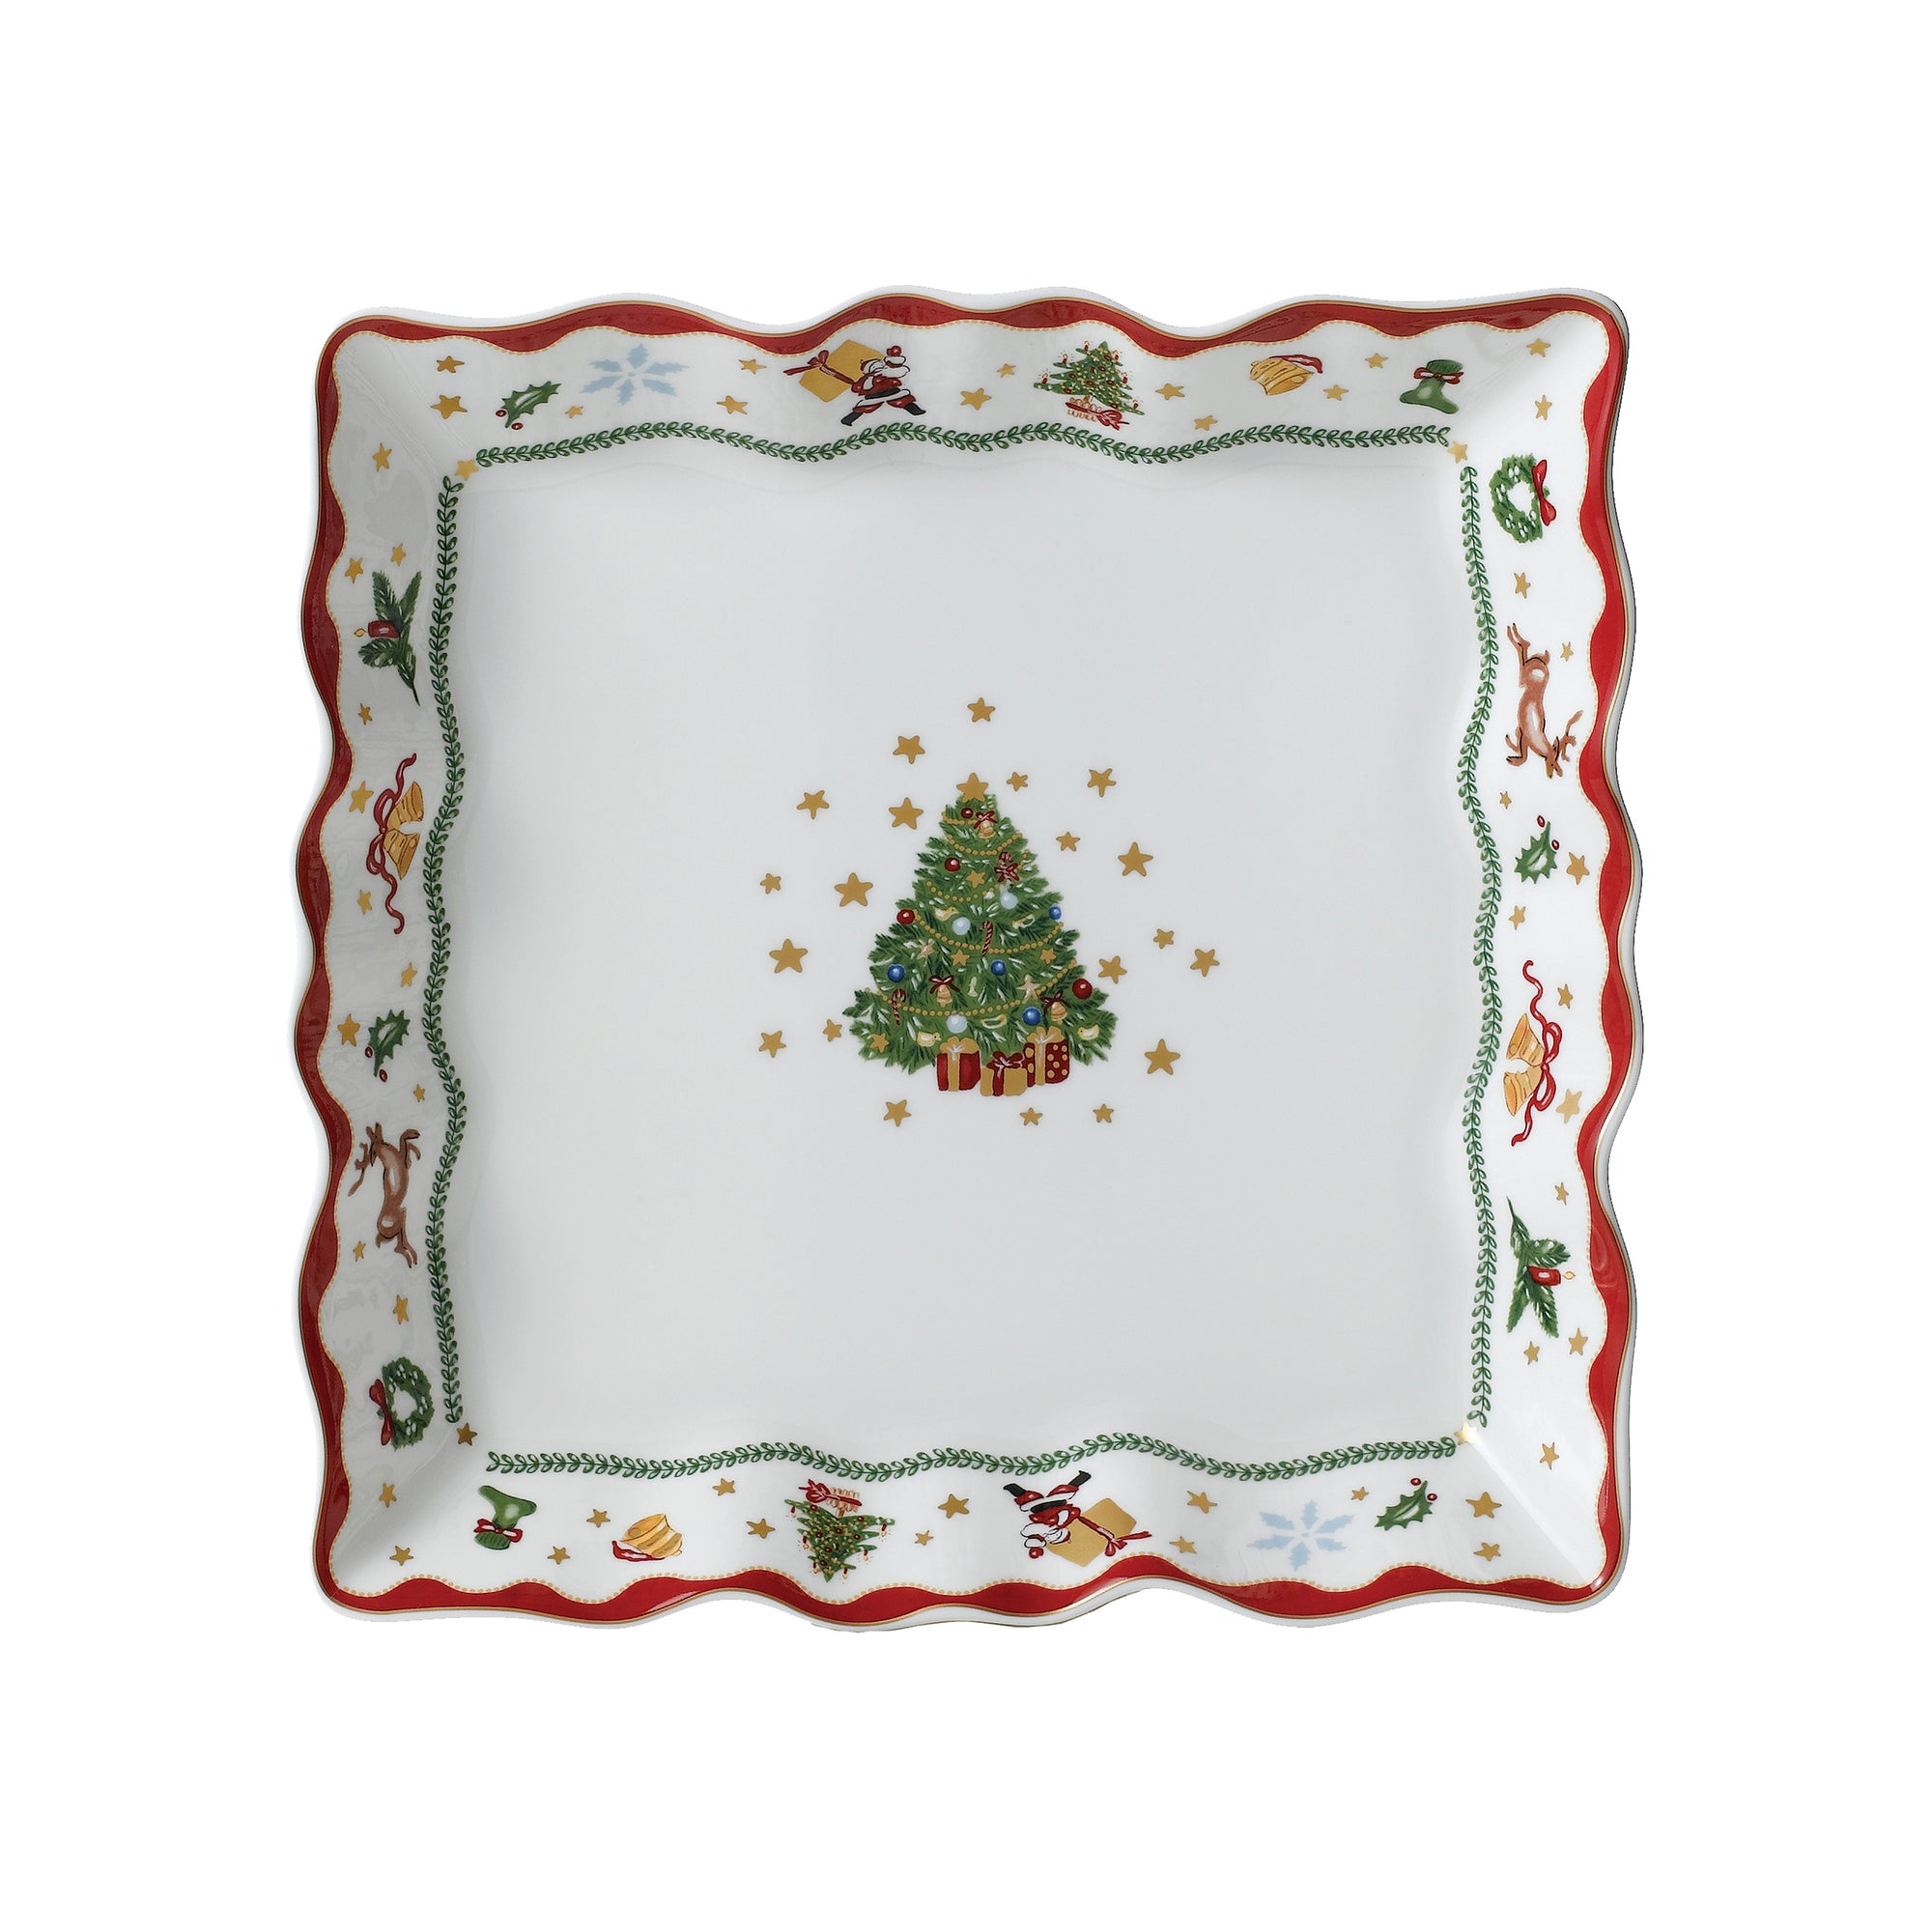 Prouna My Noel 9" Lace Square plate/Tray 